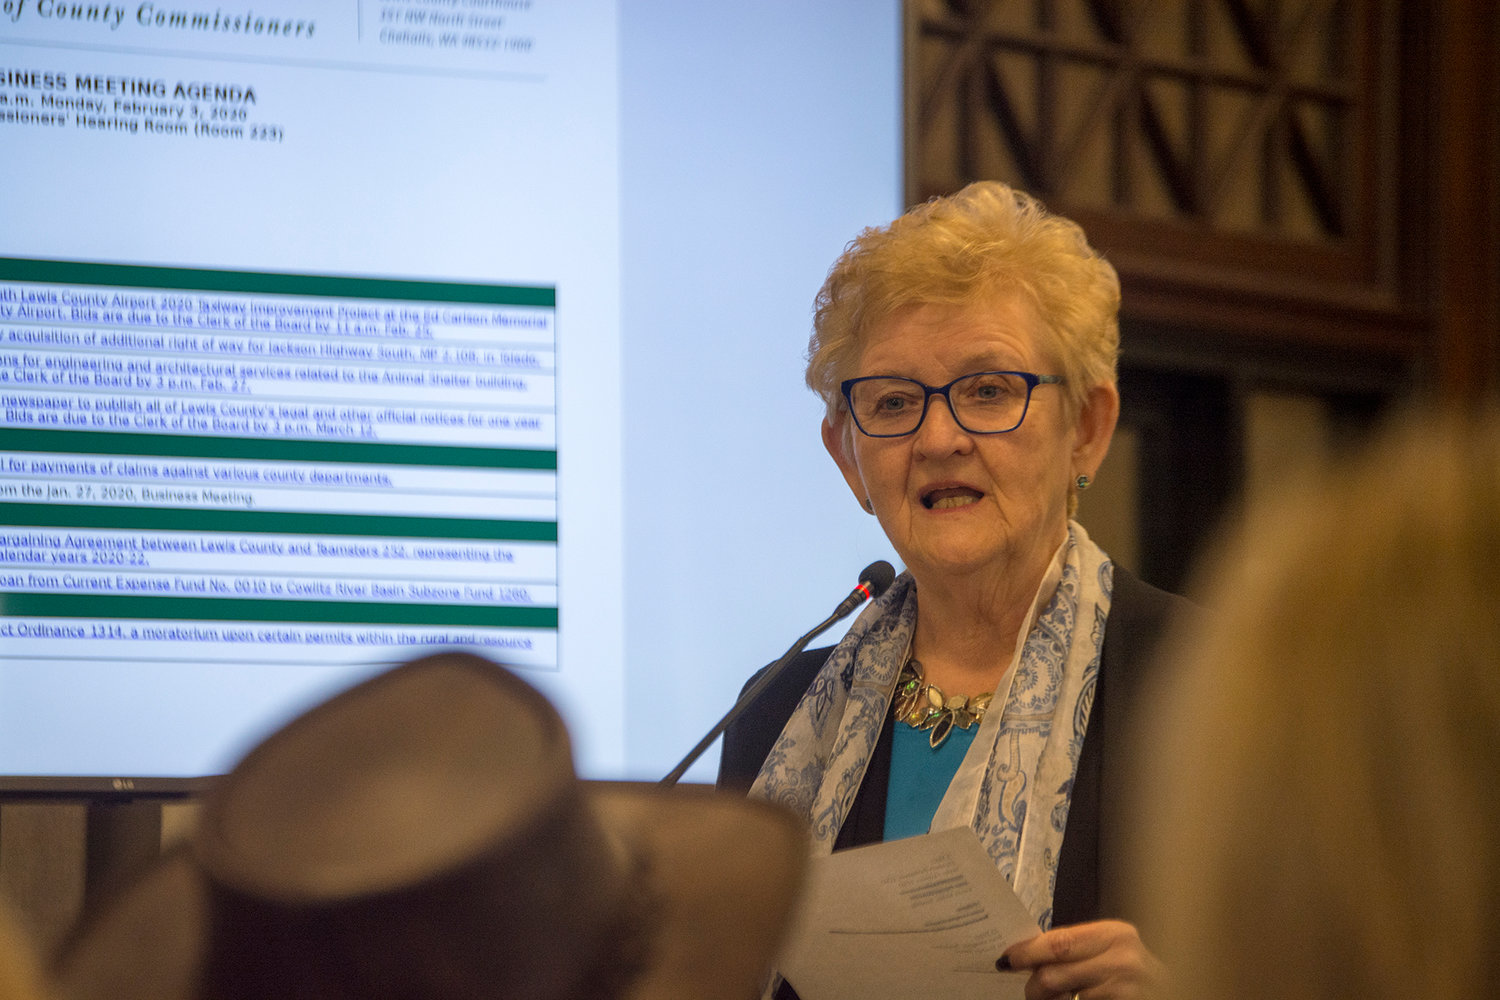 FILE PHOTO — County Commissioner Edna Fund speaks at the County Commissioner meeting in the Lewis County Courthouse last February.